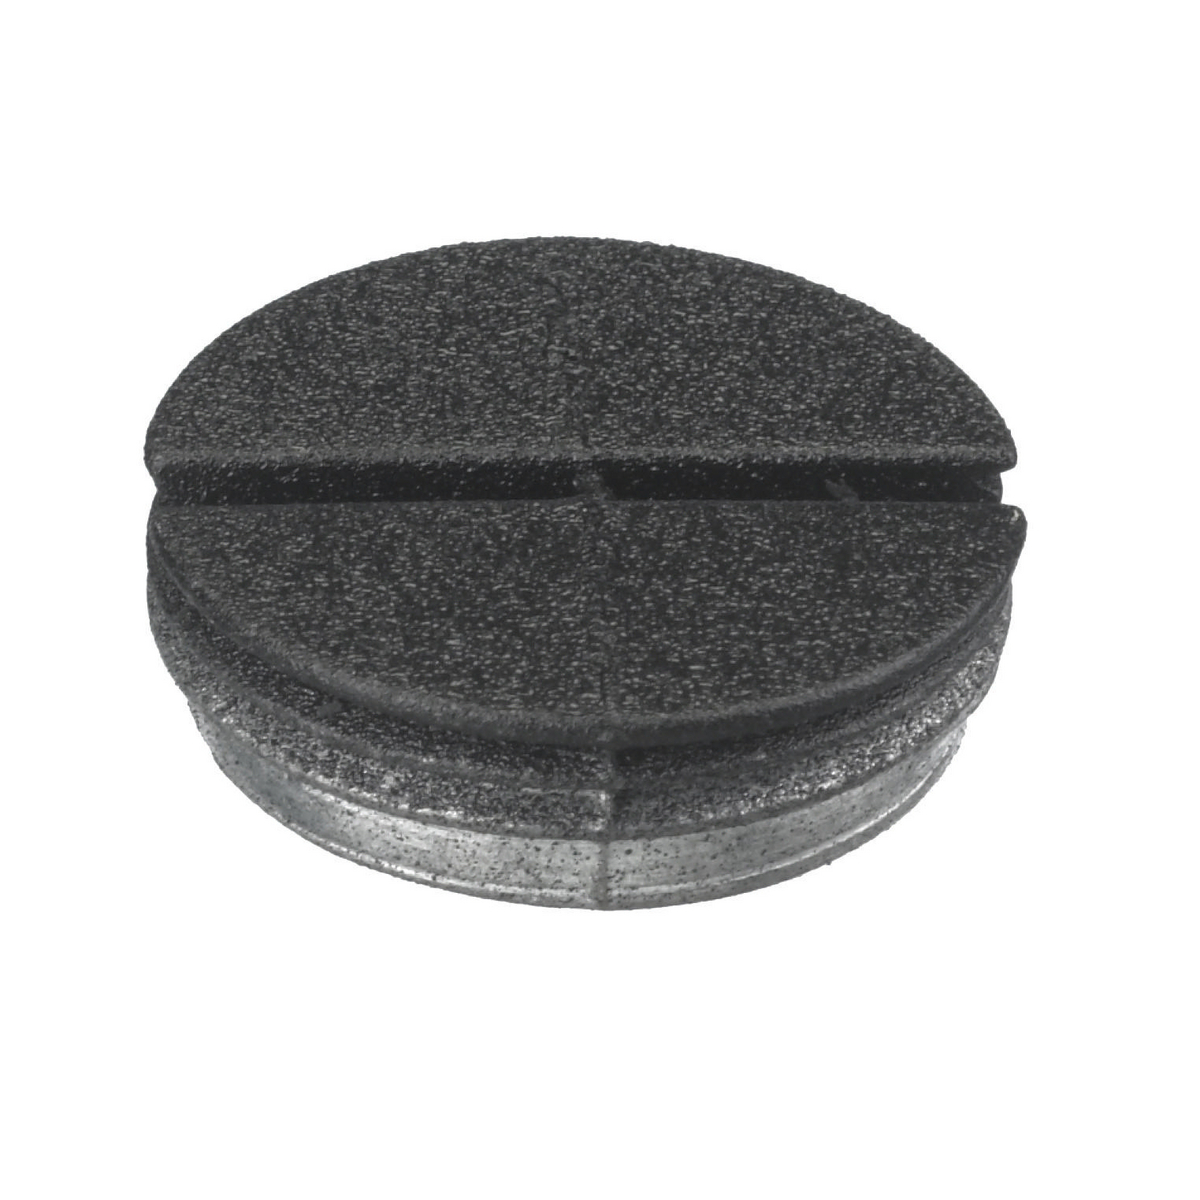 S1R 075INCH FF REPLACEMENT PLUG BLACK